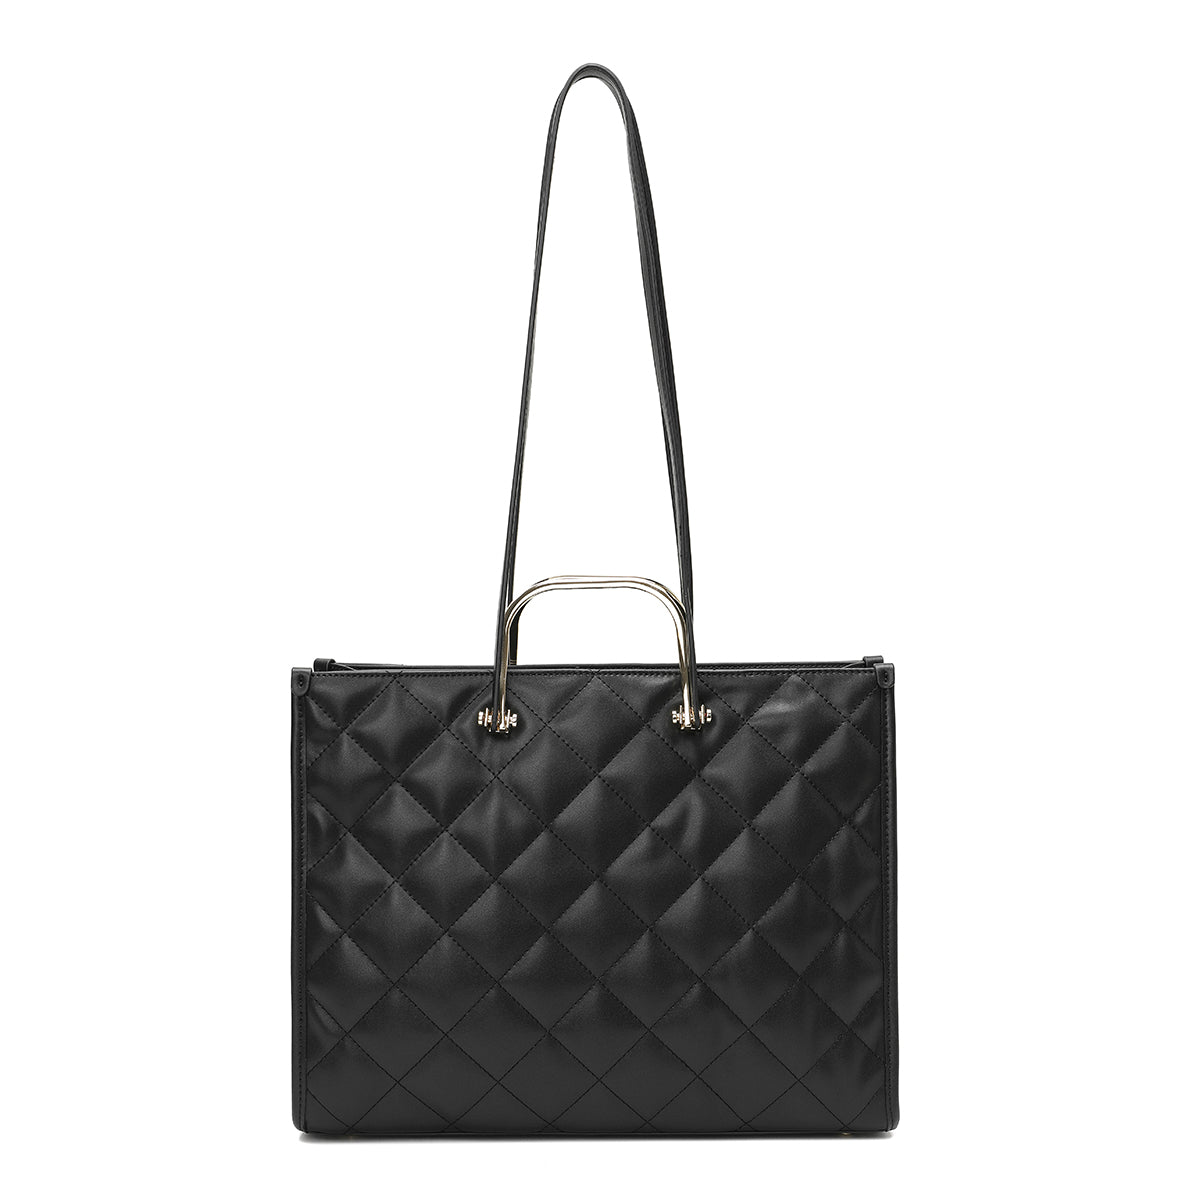 Wide bag of luxurious leather, width 34 cm - black